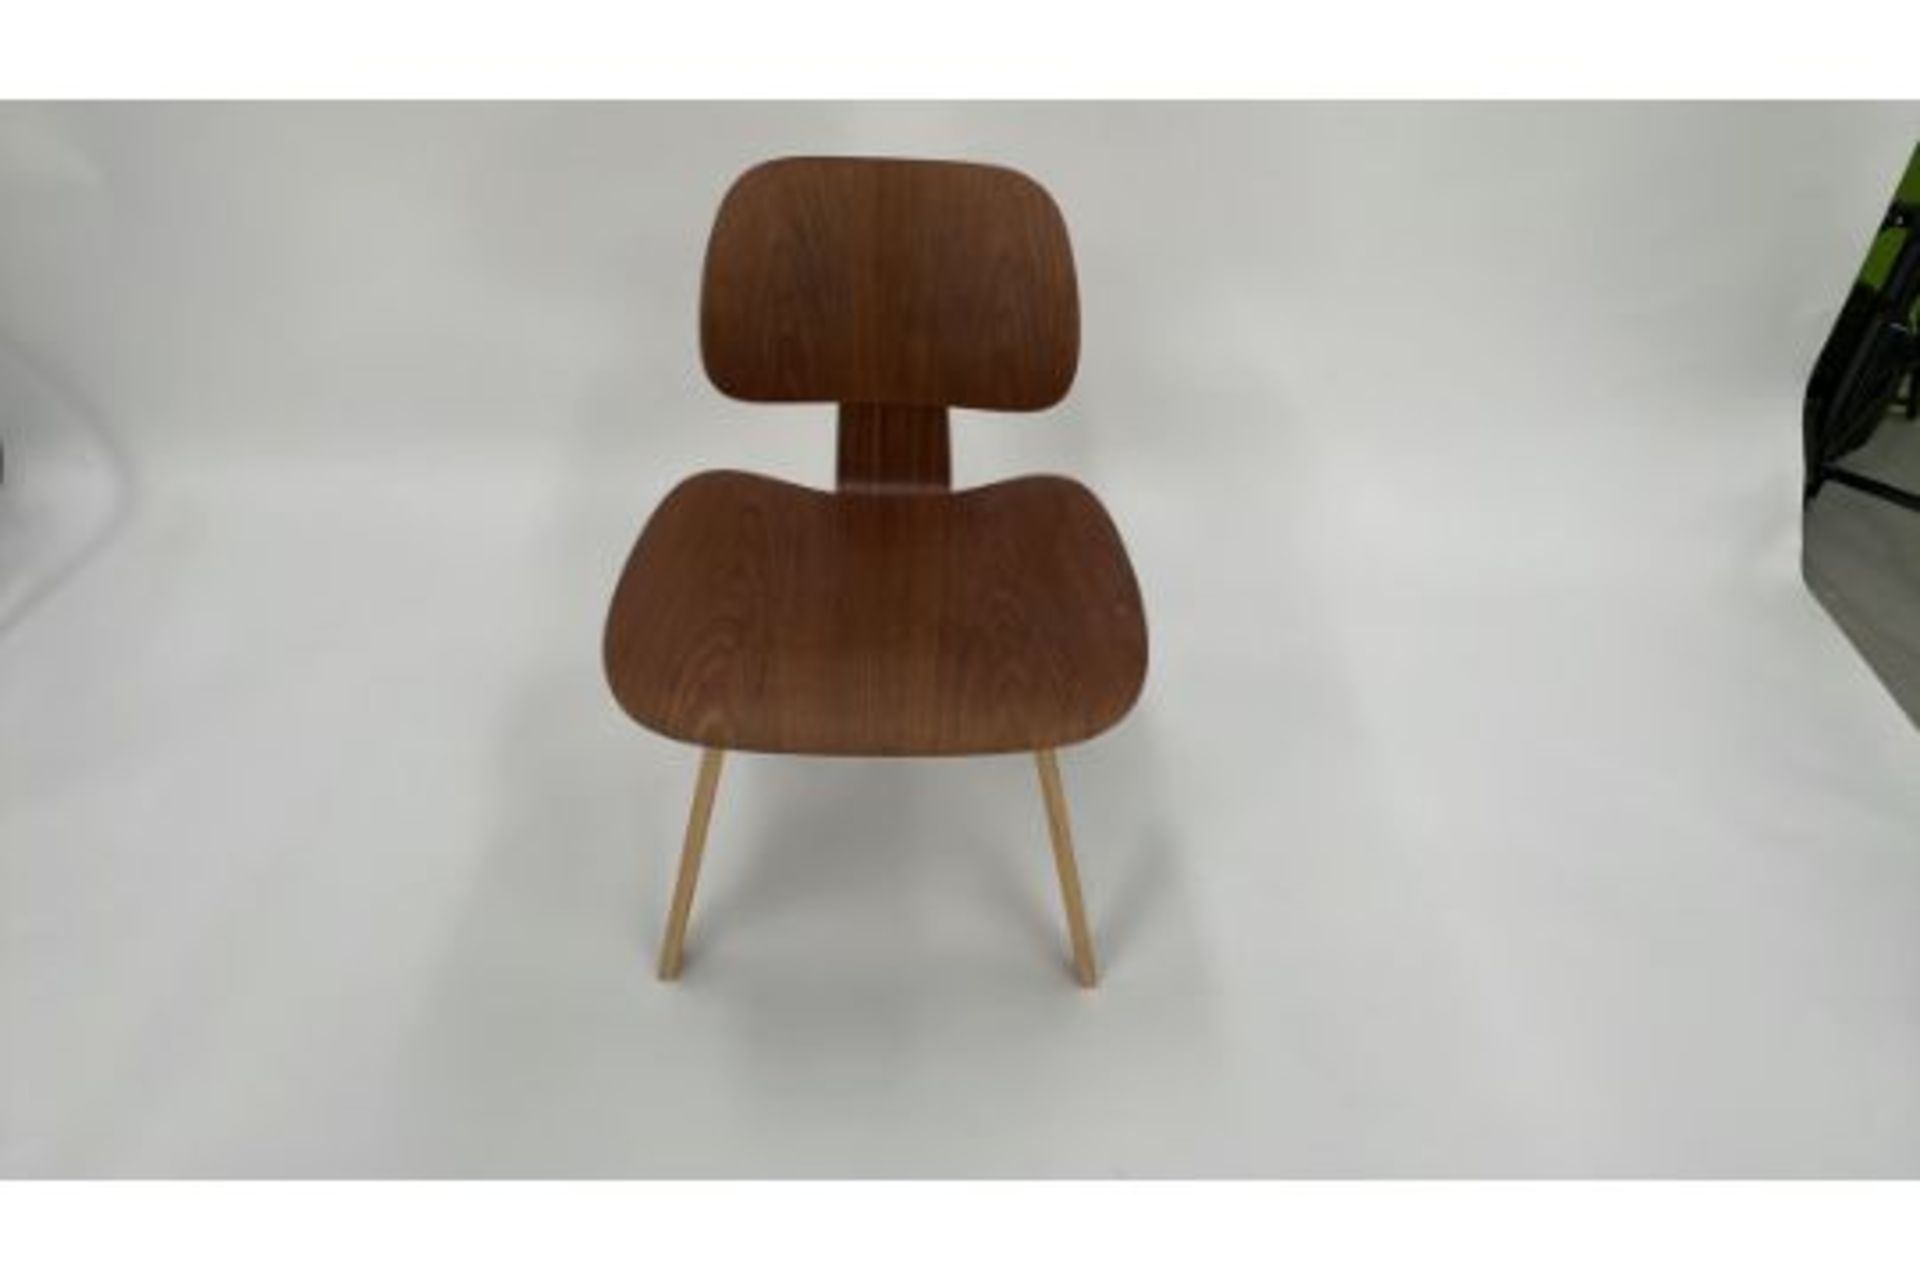 Replica Eames LCW Plywood Lounge Chair x1 - Image 2 of 3